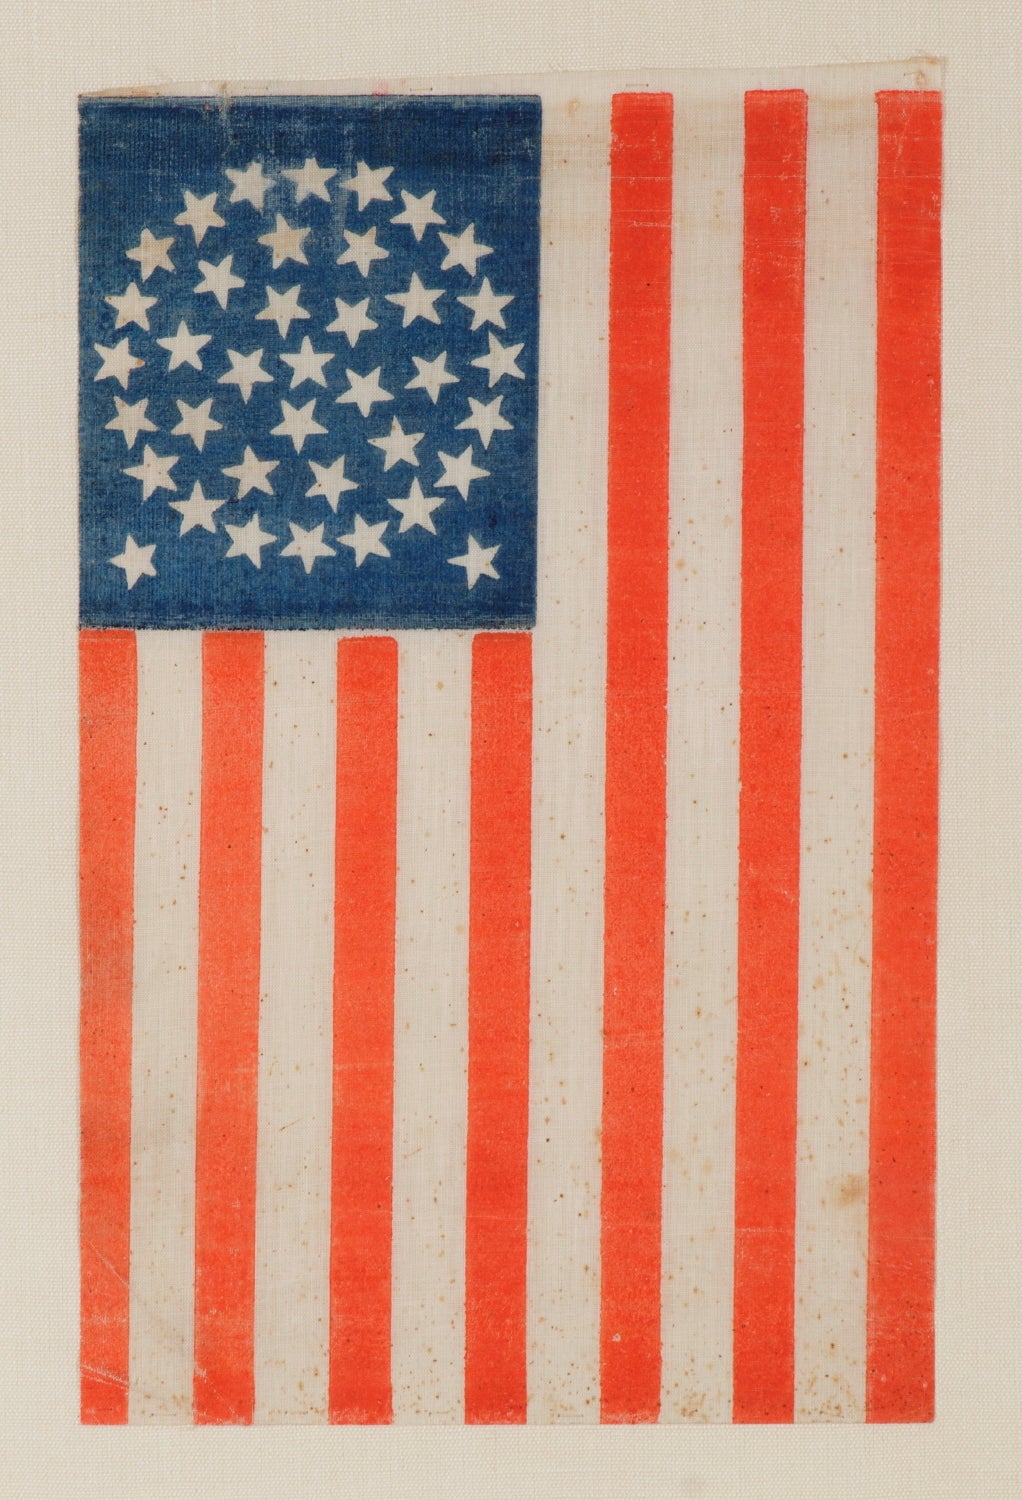 38 STARS IN A MEDALLION CONFIGURATION WITH 2 OUTLIERS AND VIBRANT COLORATION, COLORADO STATEHOOD, 1876-1889, FORMERLY IN THE COLLECTION OF RICHARD PIERCE AND PICTURED IN HIS TEXT ON FLAG COLLECTING:

38 star American parade flag, printed on